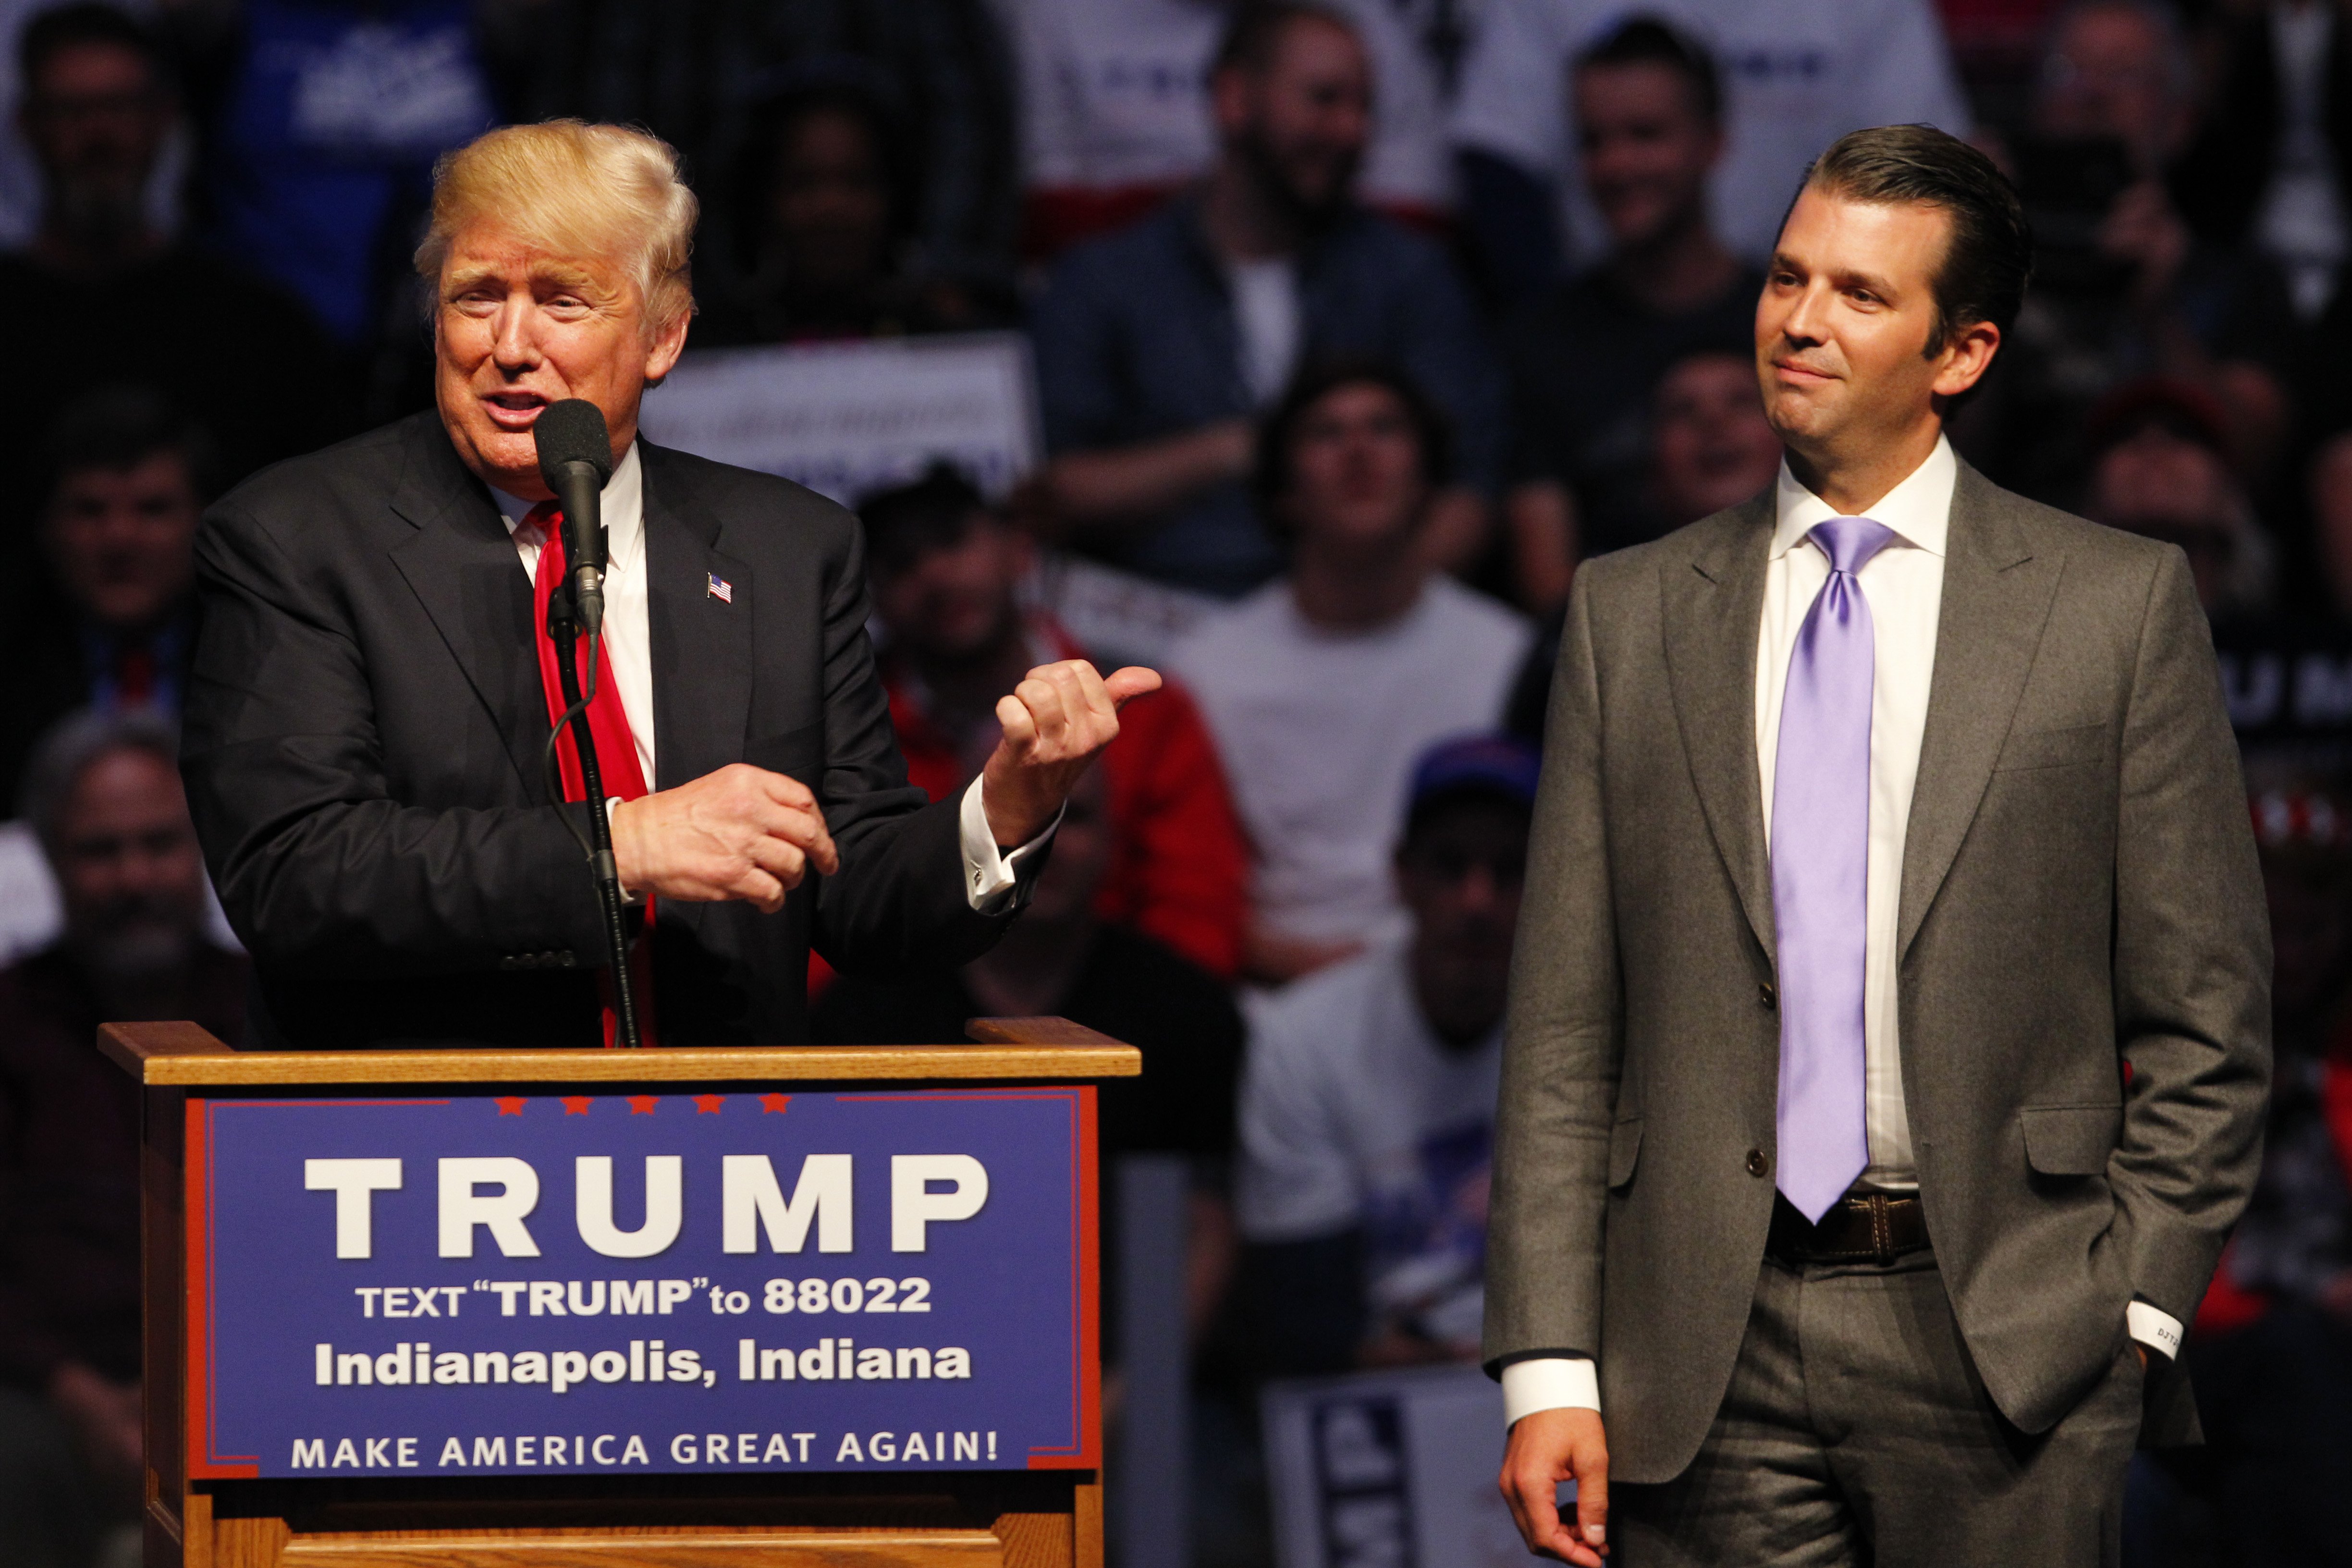 Donald Trump and his son Donald Trump Jr at a campaign rally in Indianapolis, Indiana on April 27, 2016 | Photo: Getty Images